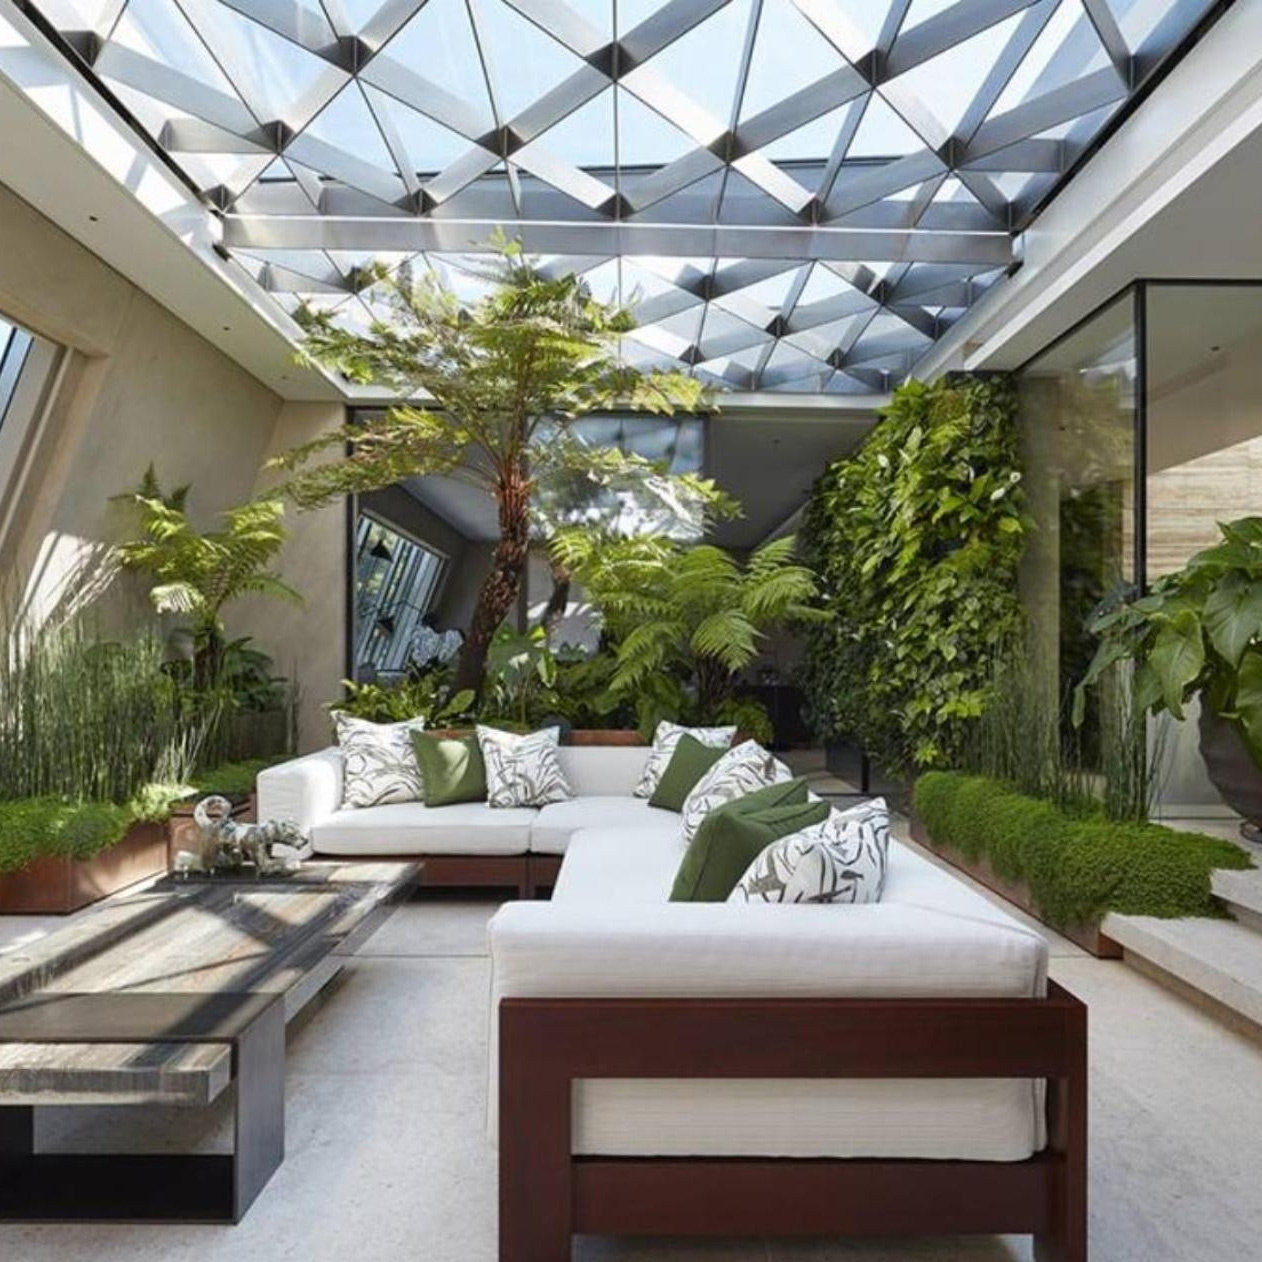 Put rain forest in your living room